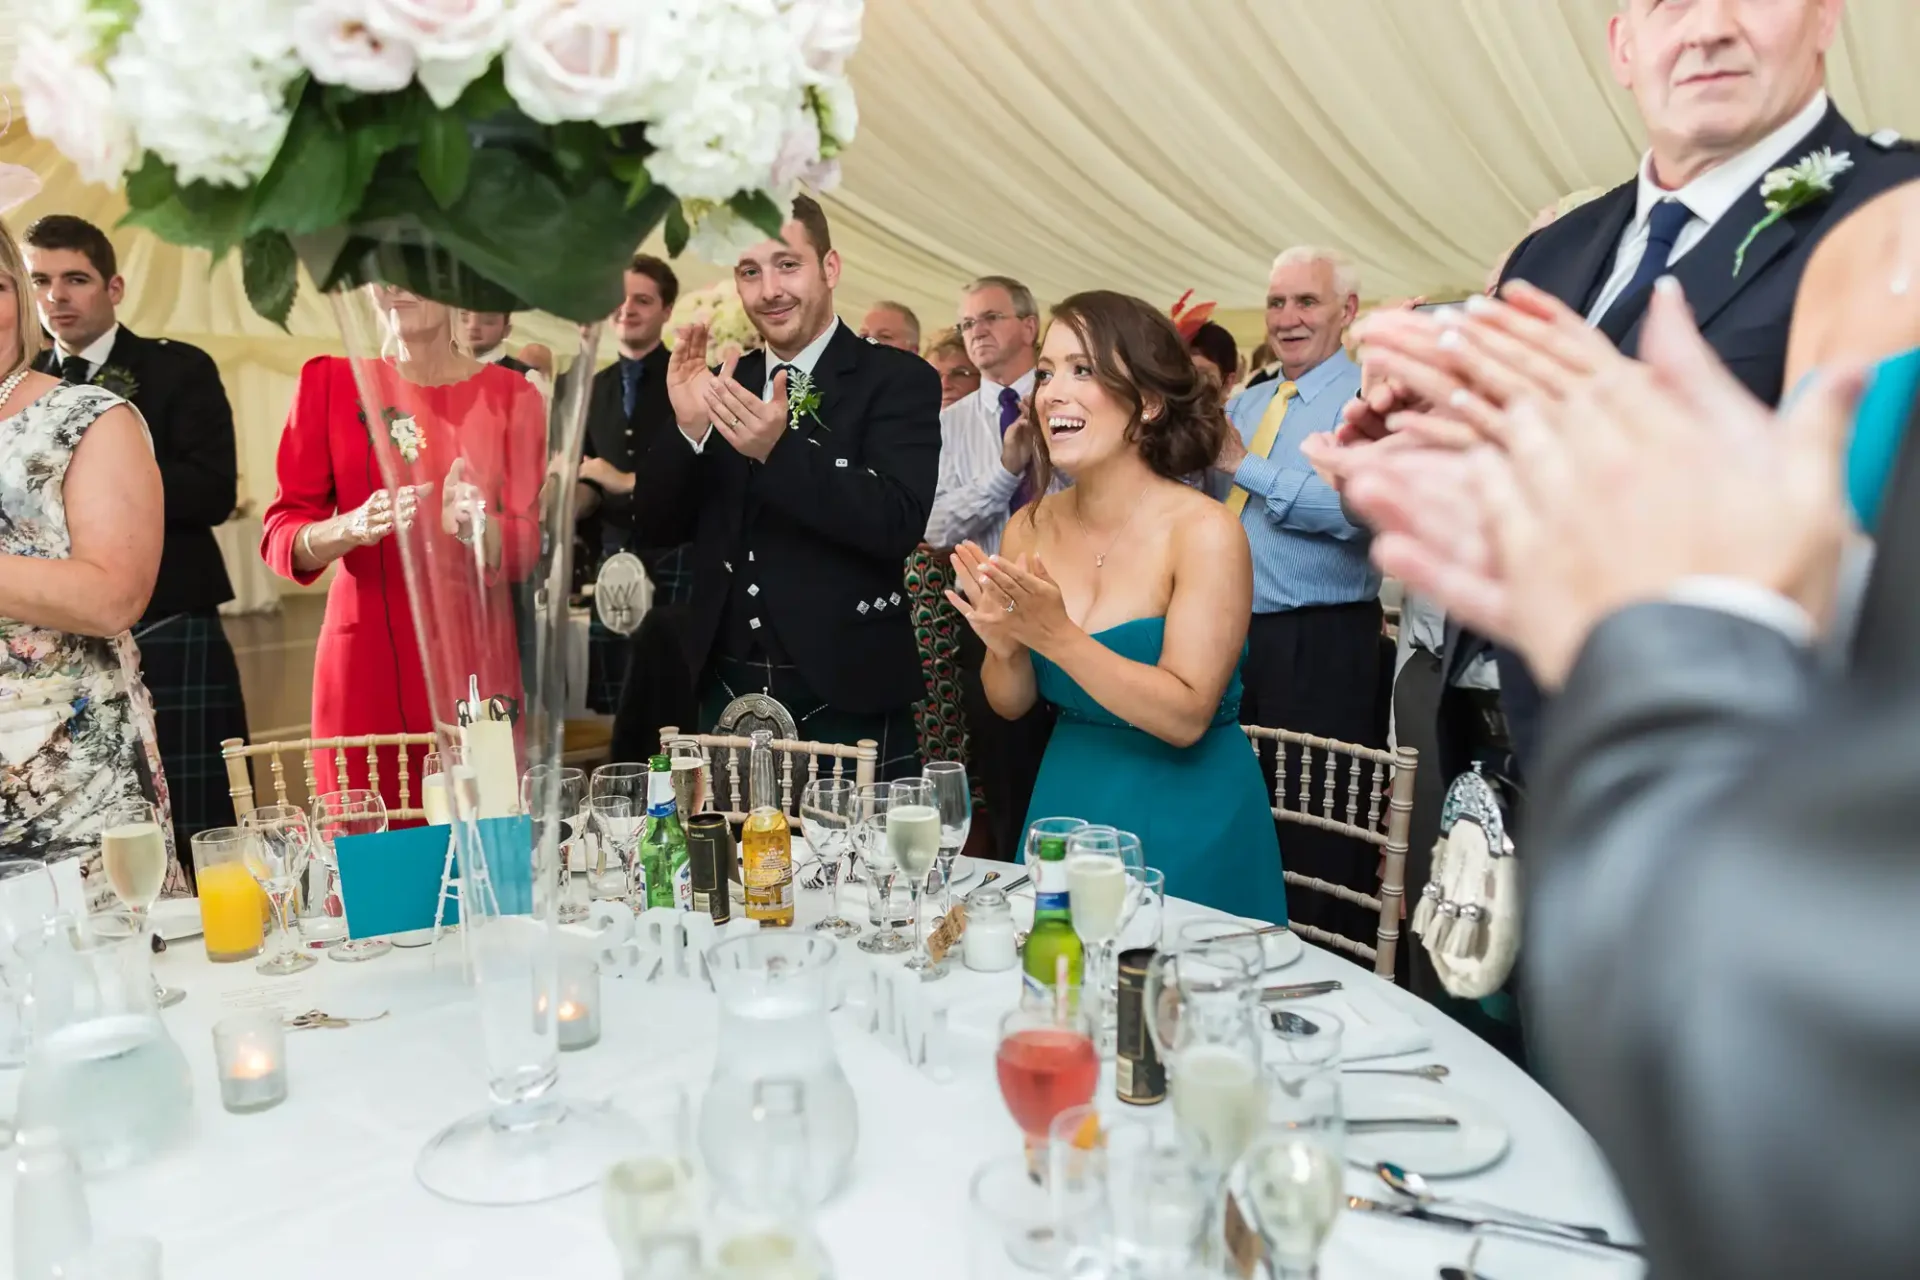 Wedding guests clapping and laughing around a festively decorated table inside a tent.